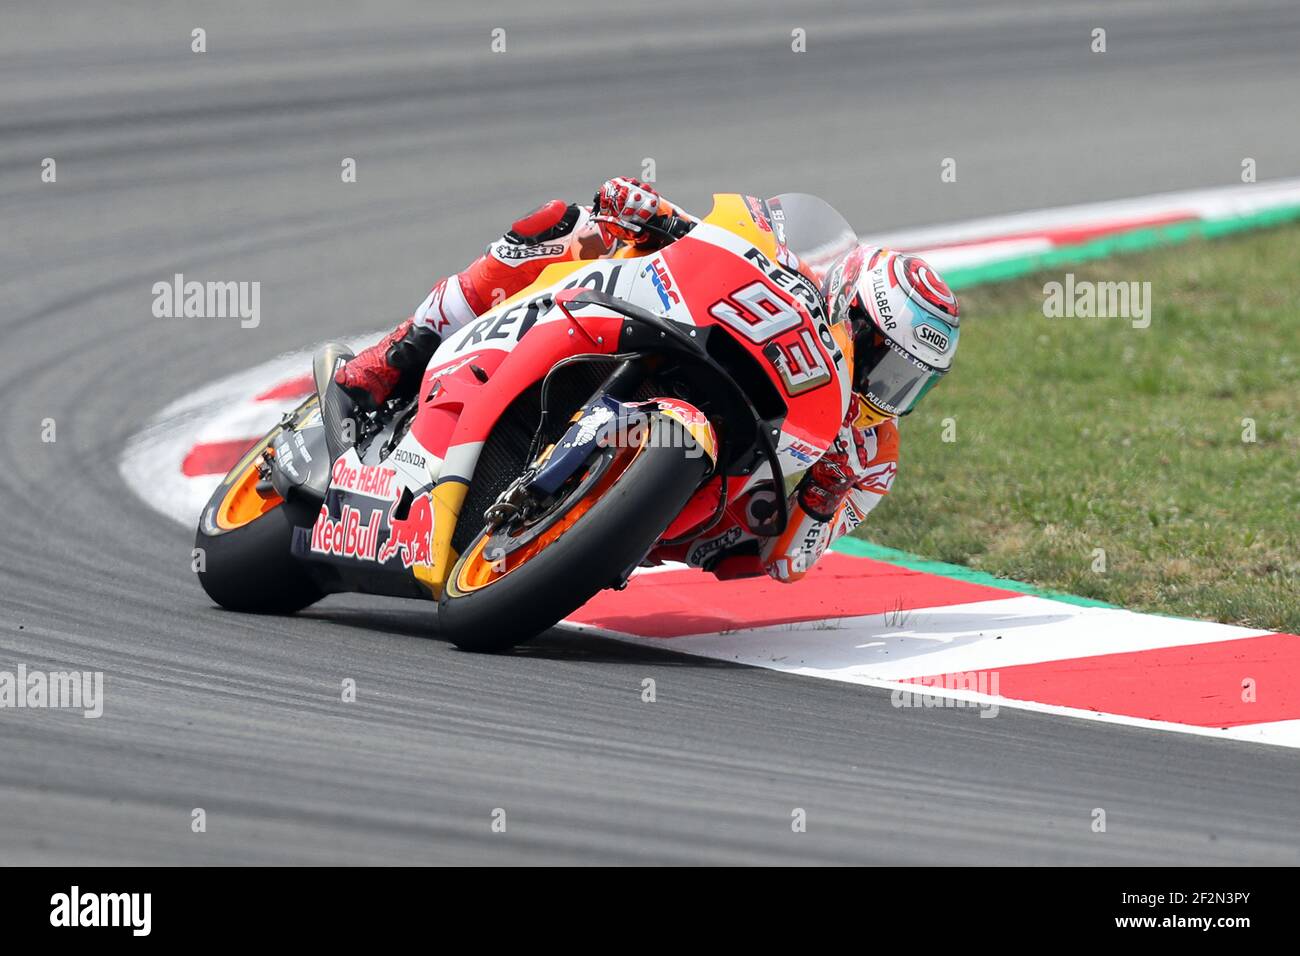 Marc Marquez of Spain and Repsol Honda Team competes during Moto GP race at  The Catalunya